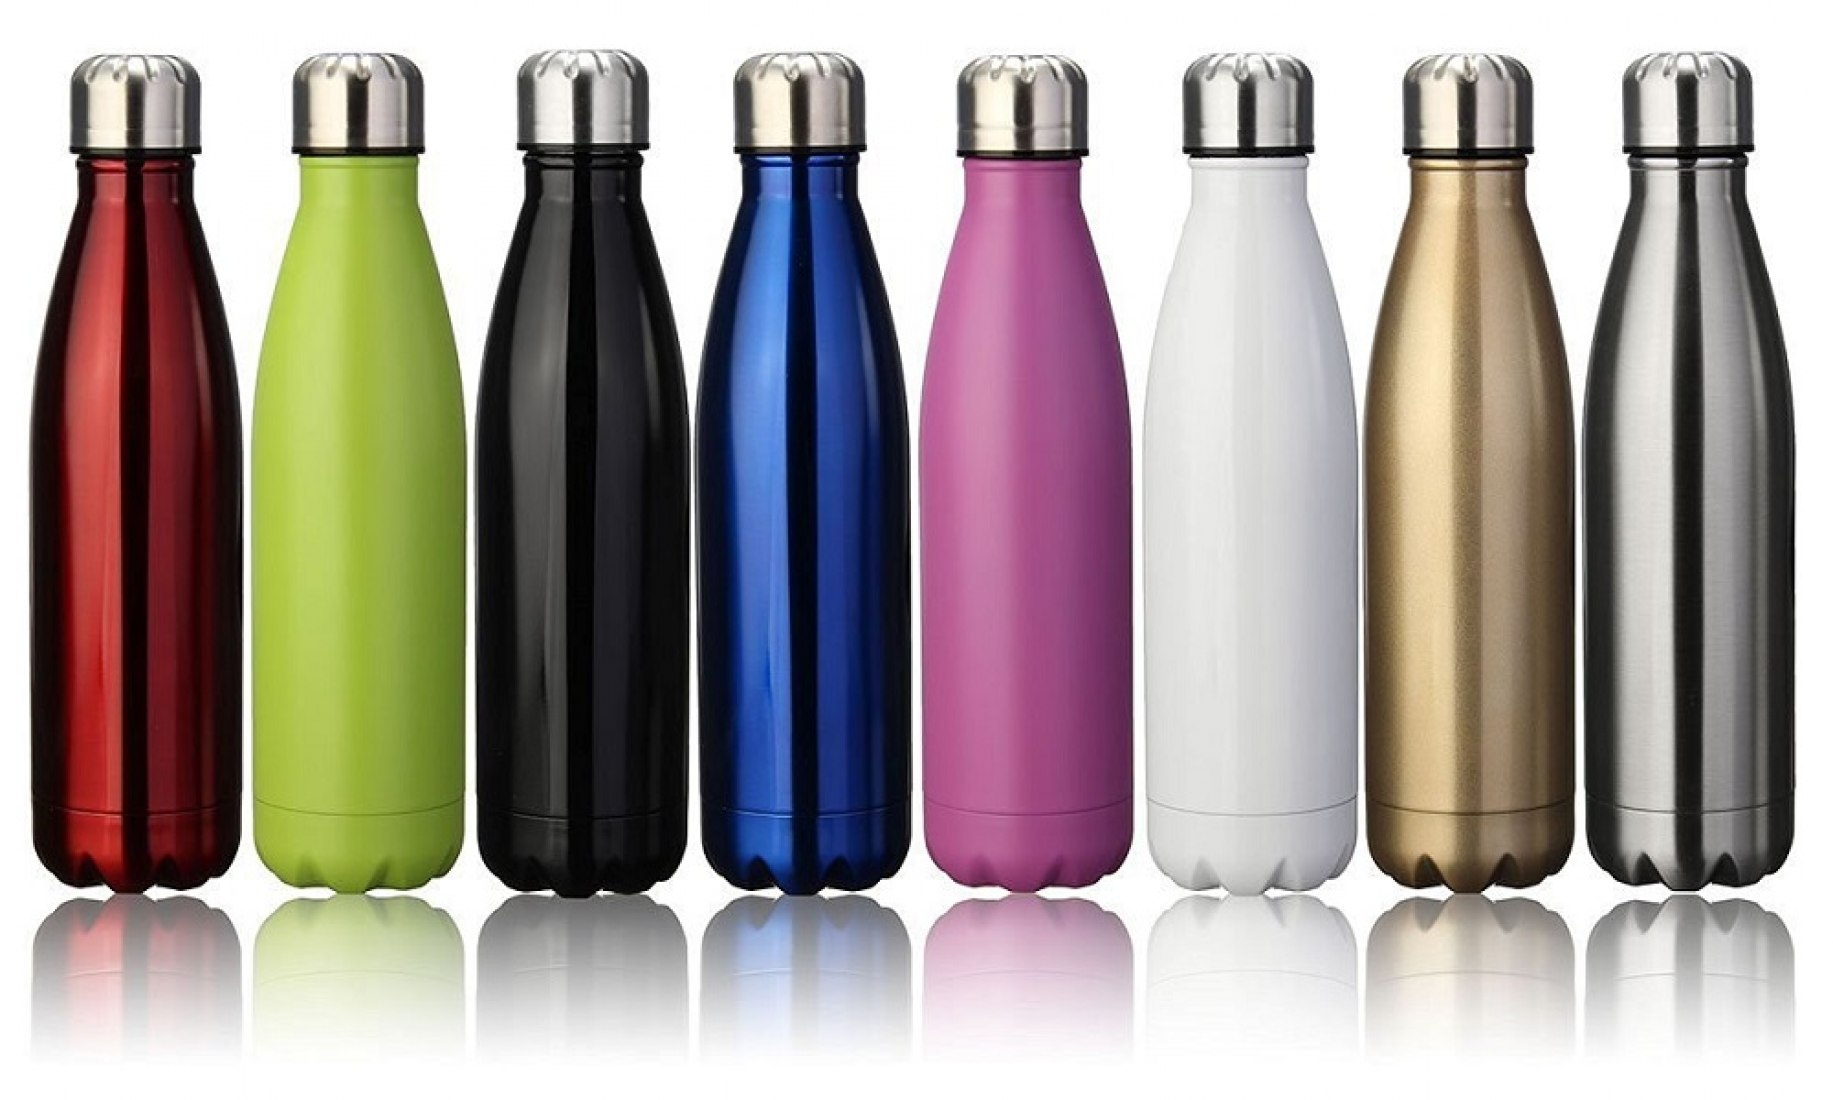 Insulated Stainless Steel Bottle, The Strength of Architecture